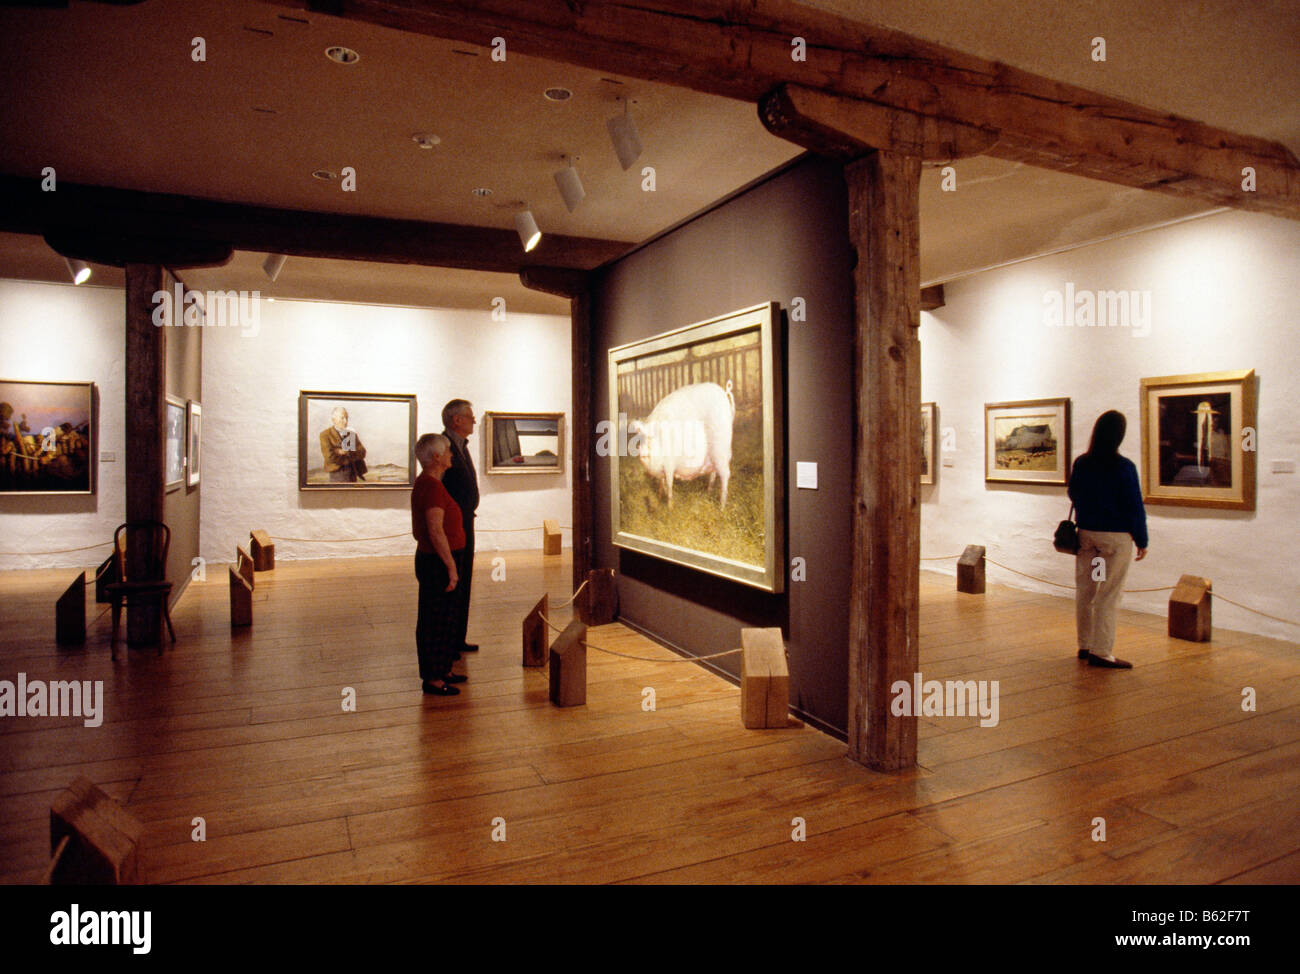 Exhibiting American art in a 19th-century grist mill, the Brandywine River Museum, Chadds Ford, Pennsylvania, USA Stock Photo